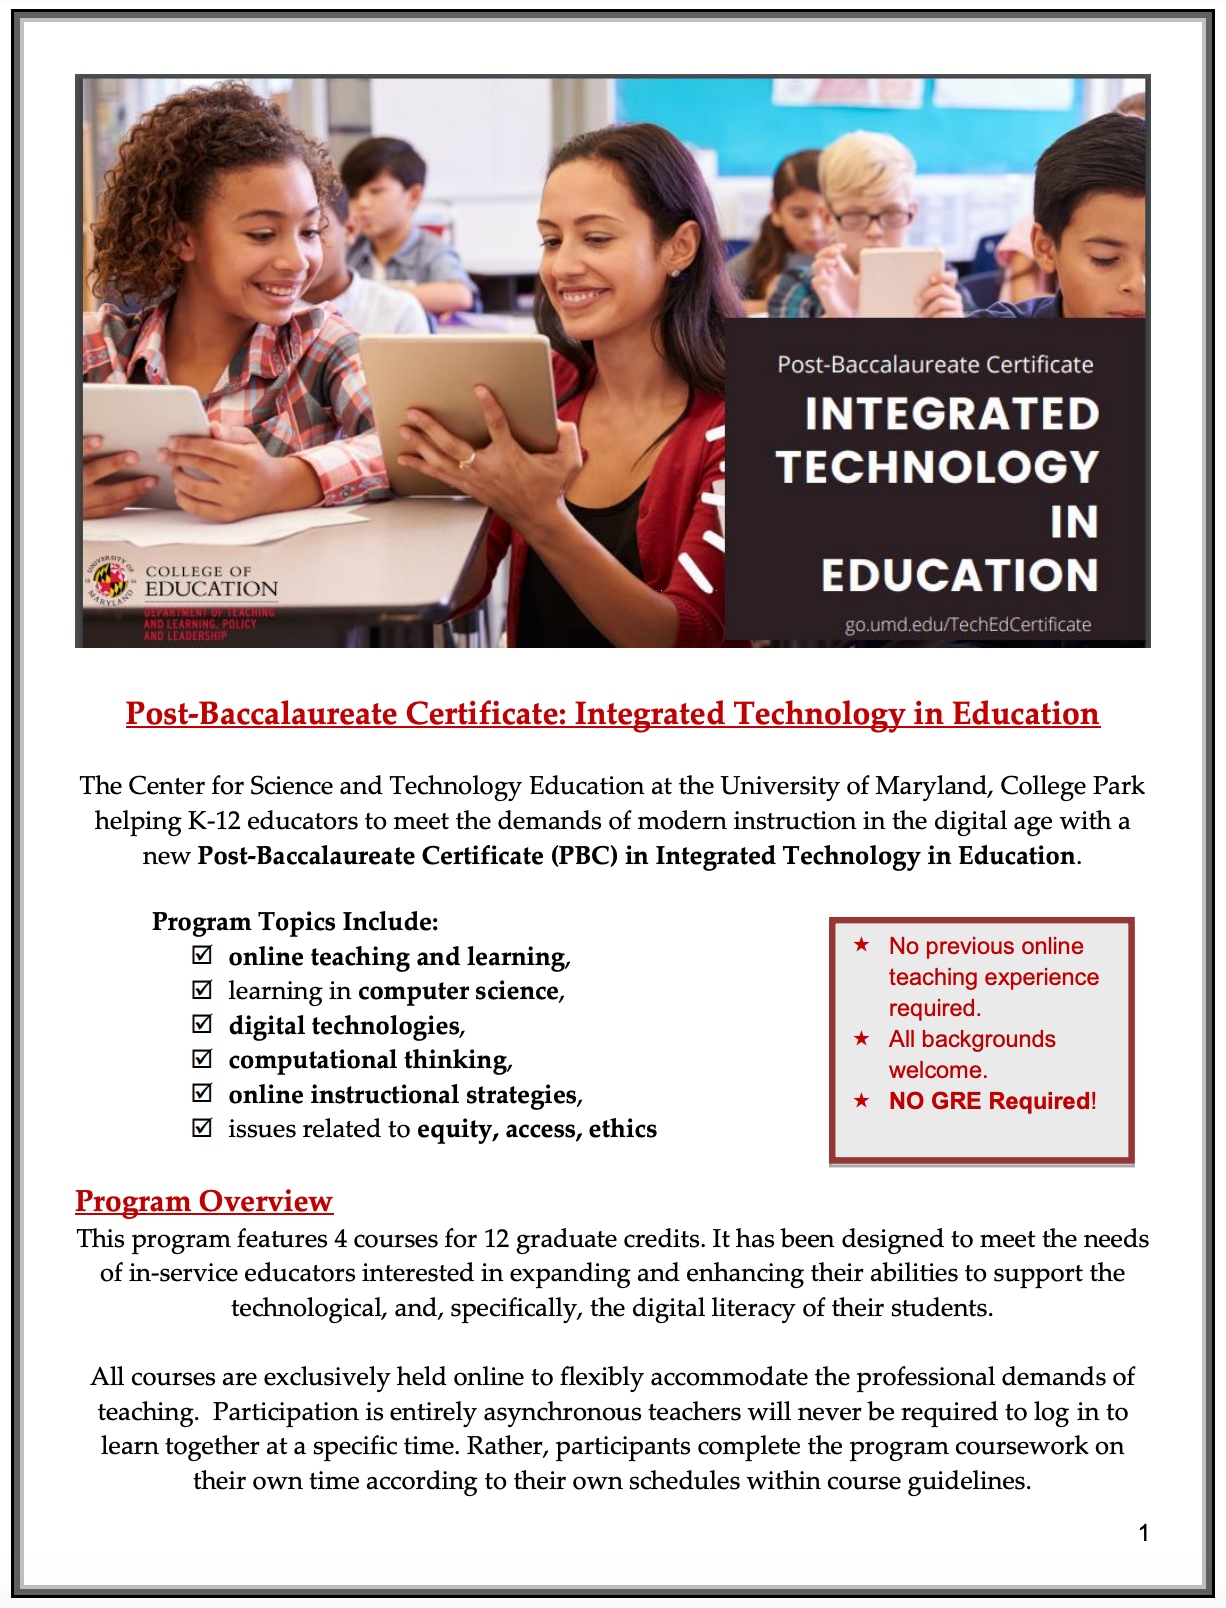 Integrated Technology Education Post-Baccalaureate Certificate flyer containing the same information found on the website.